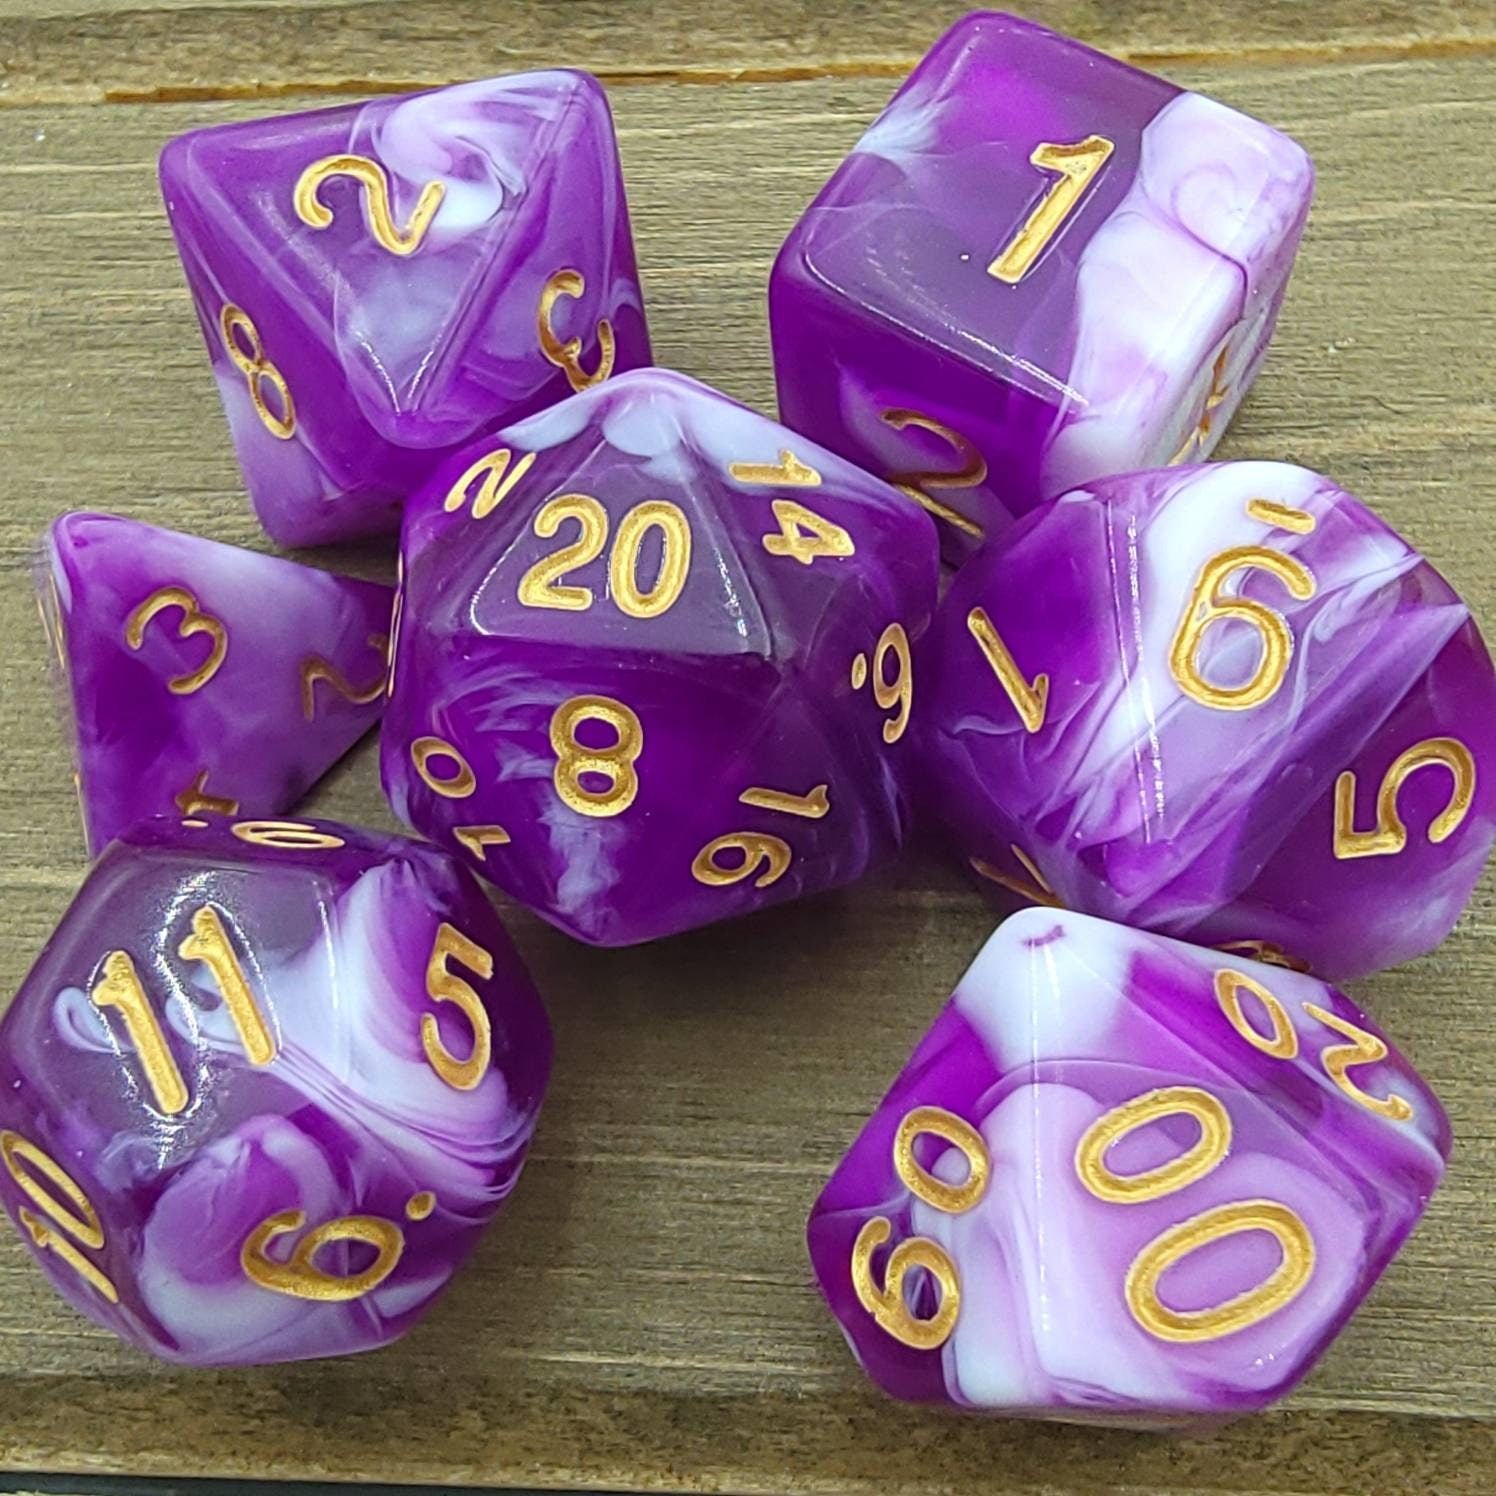 Grape Swirl | RPG Dice Set| RPG Dice | Polyhedral Dice Set | Dungeons and Dragons | DnD Dice Set | Gaming Dice Set